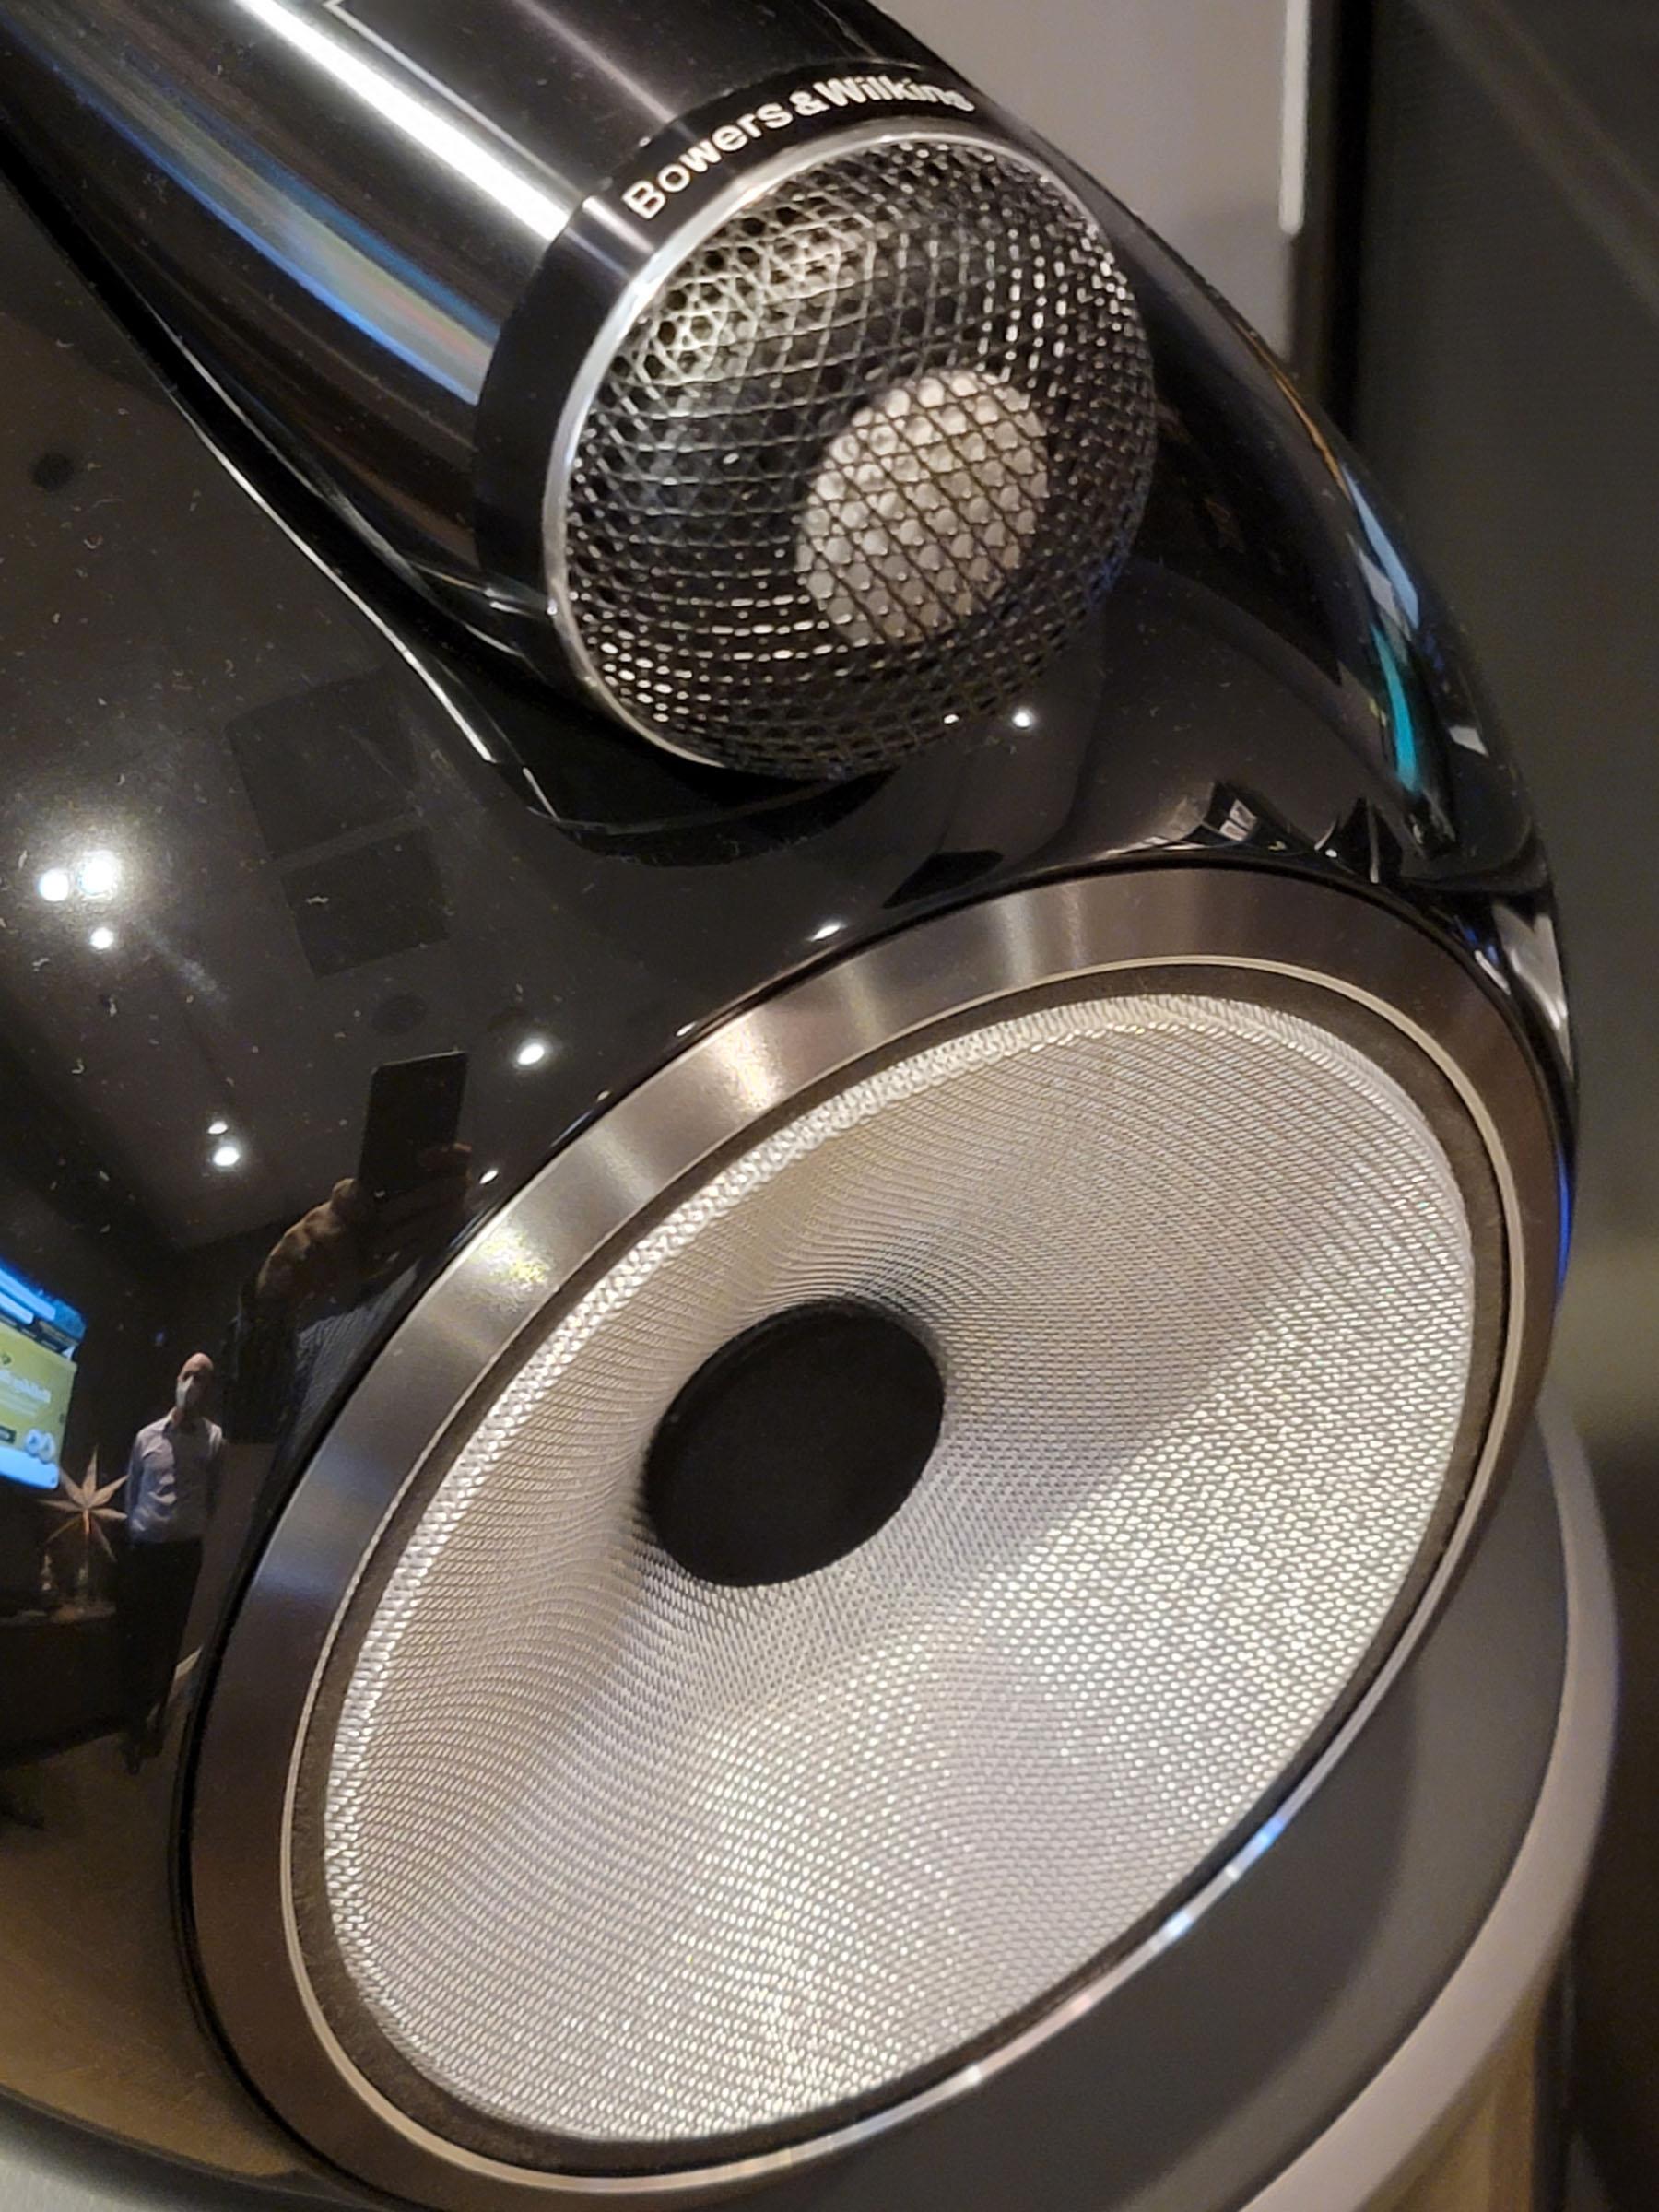 The 801 D4 is the undisputed heavyweight champion of the Bowers & Wilkins speaker lineup. Hear what they sounded like at the demo. dfb17894 20211113 150513